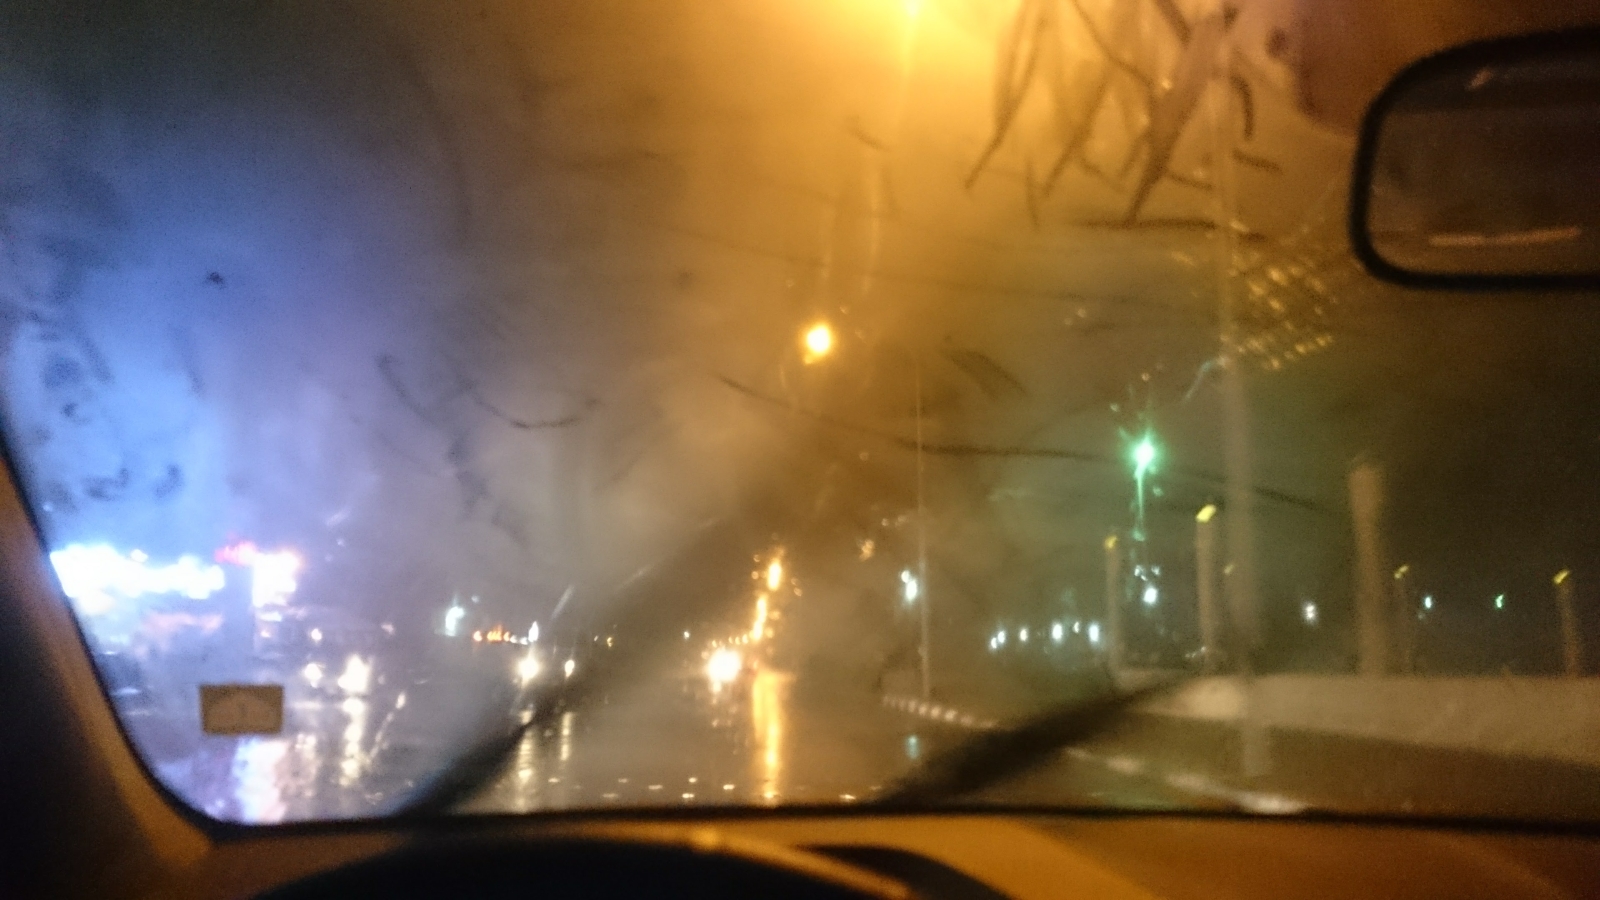 How to Defrost Your Windshield in Less Than 5 Minutes